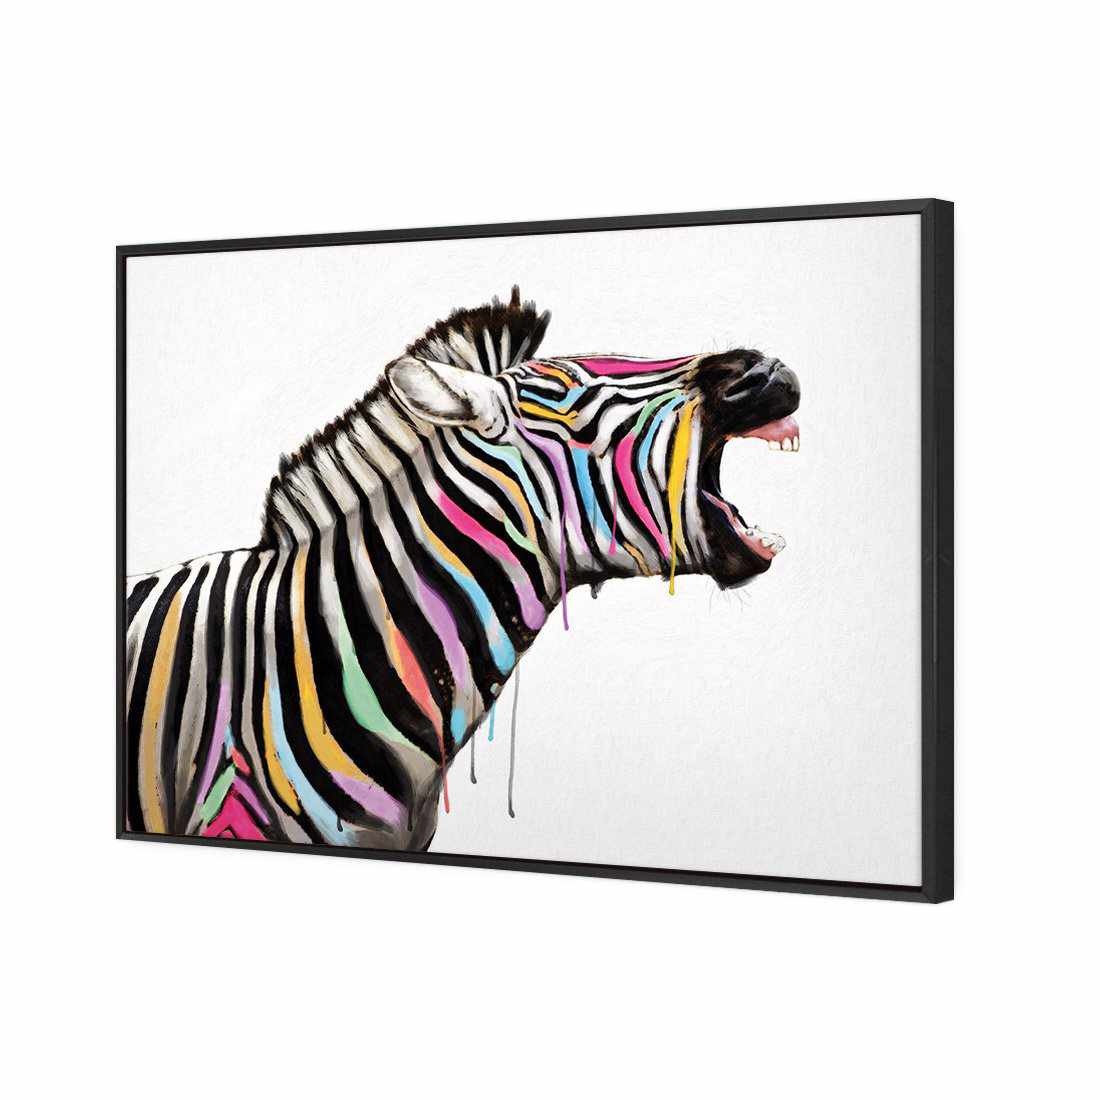 Laughing Stock Canvas Art-Canvas-Wall Art Designs-45x30cm-Canvas - Black Frame-Wall Art Designs